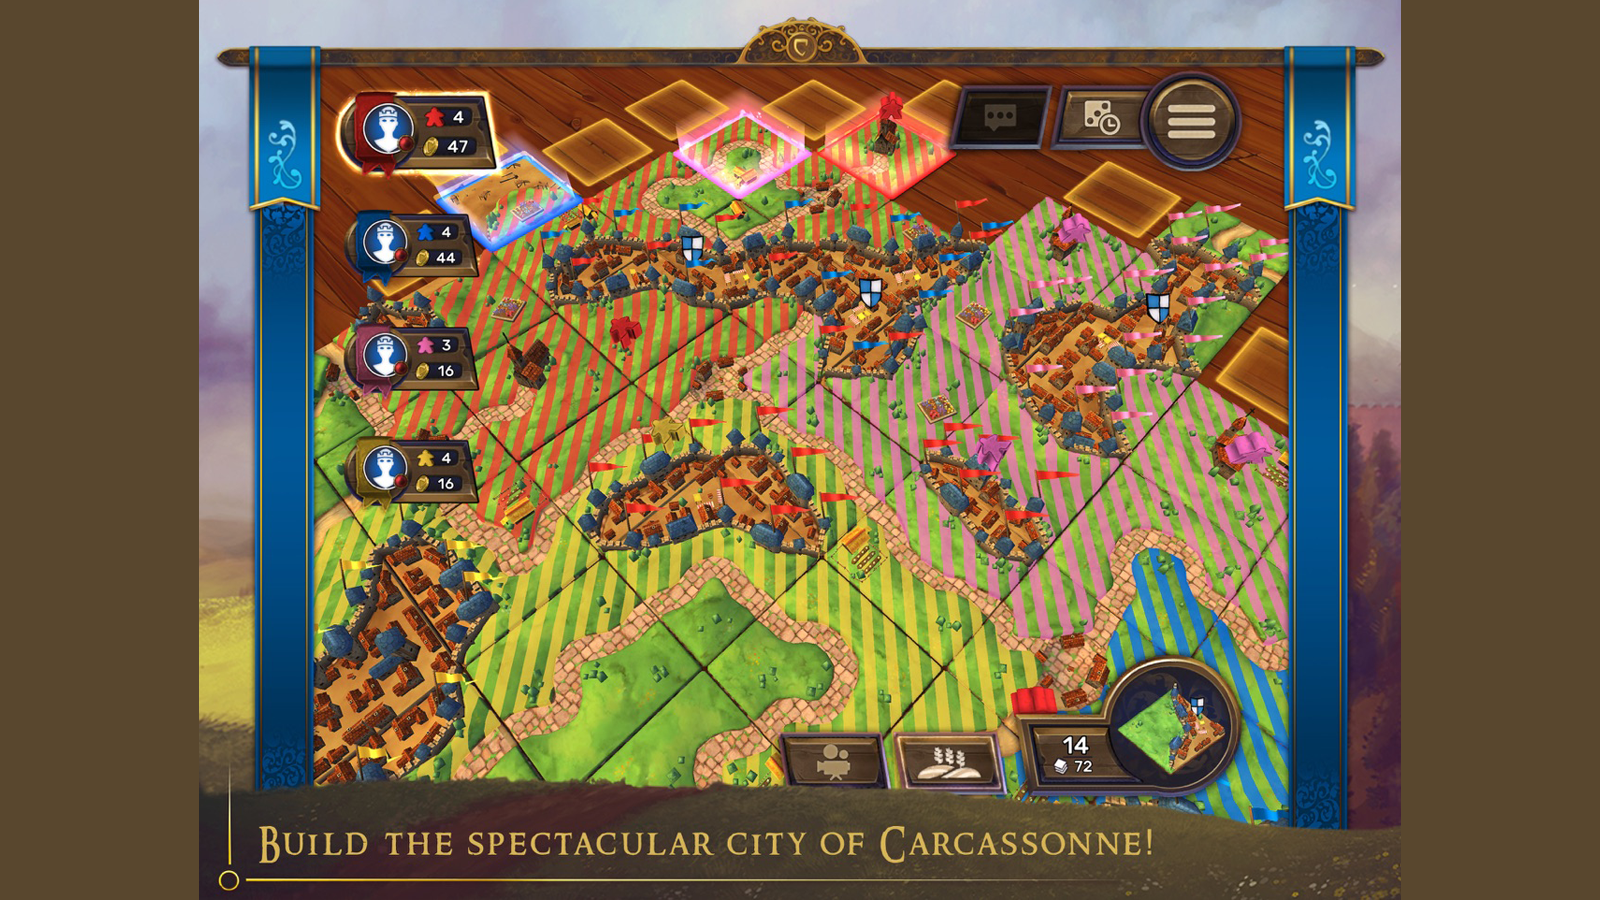 Carcassonne sample gameplay with tiles